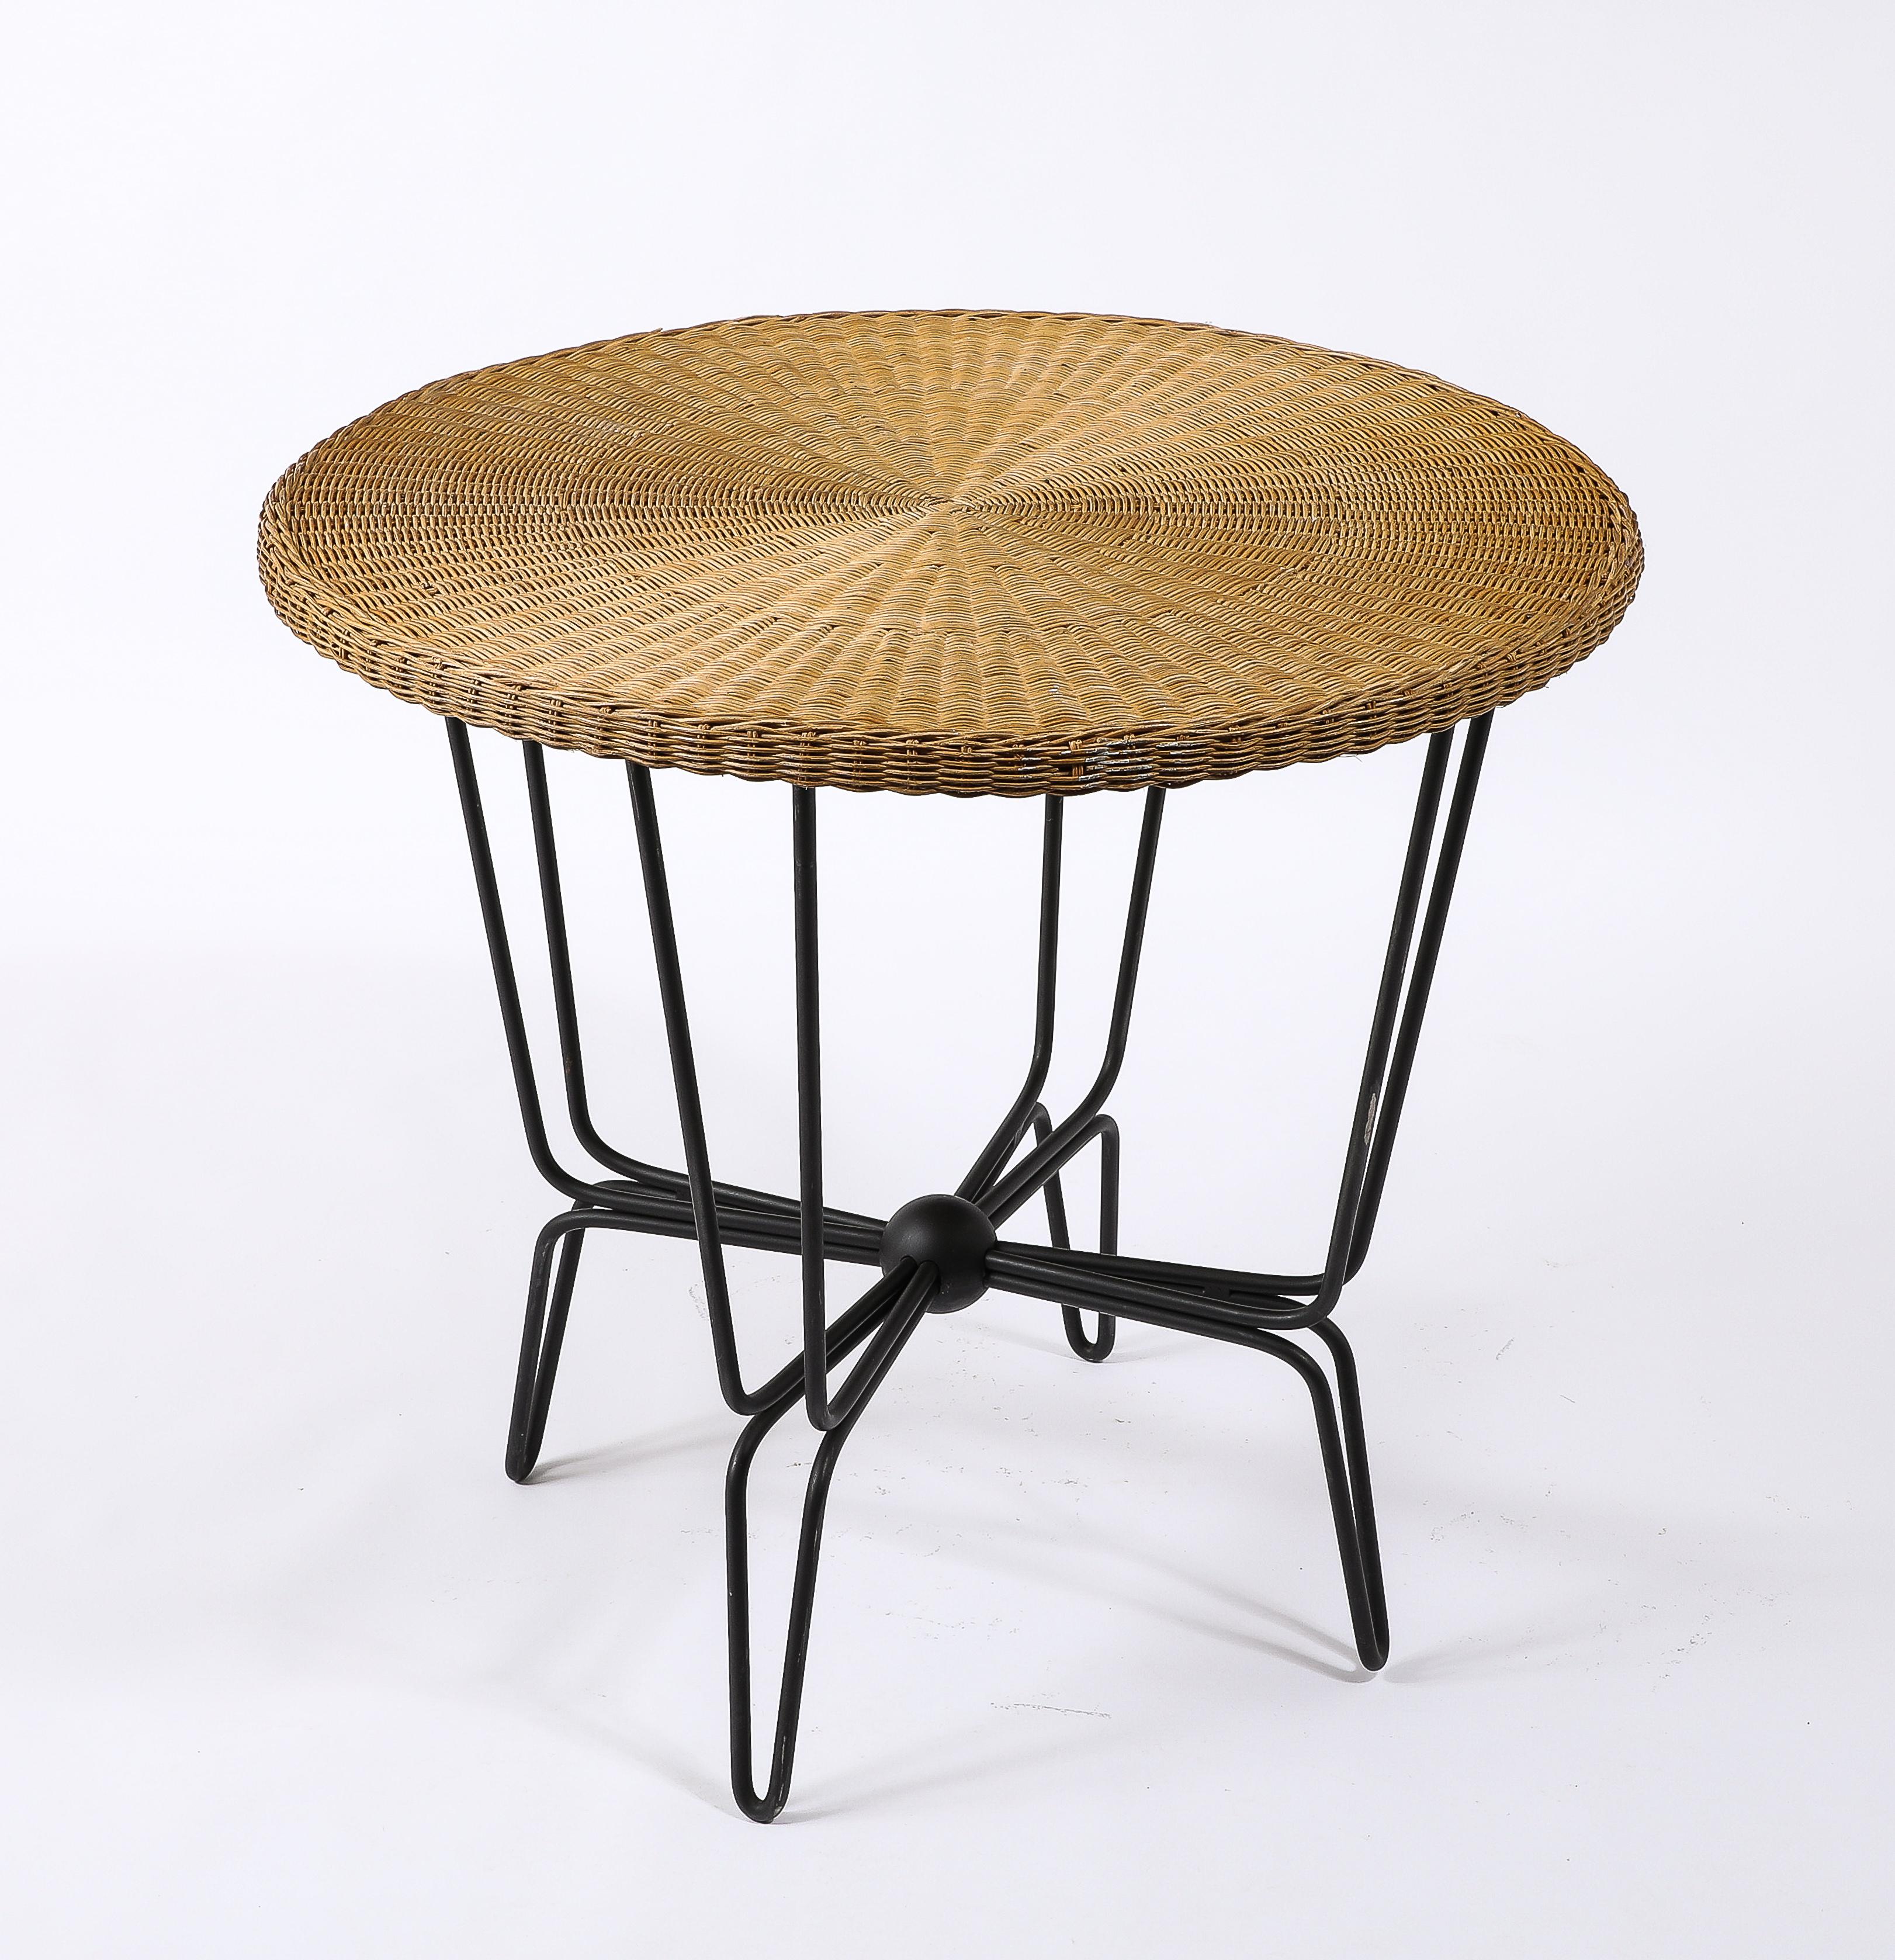 Mathieu Mategot Wrought Iron & Wicker Table, France 1950's For Sale 5